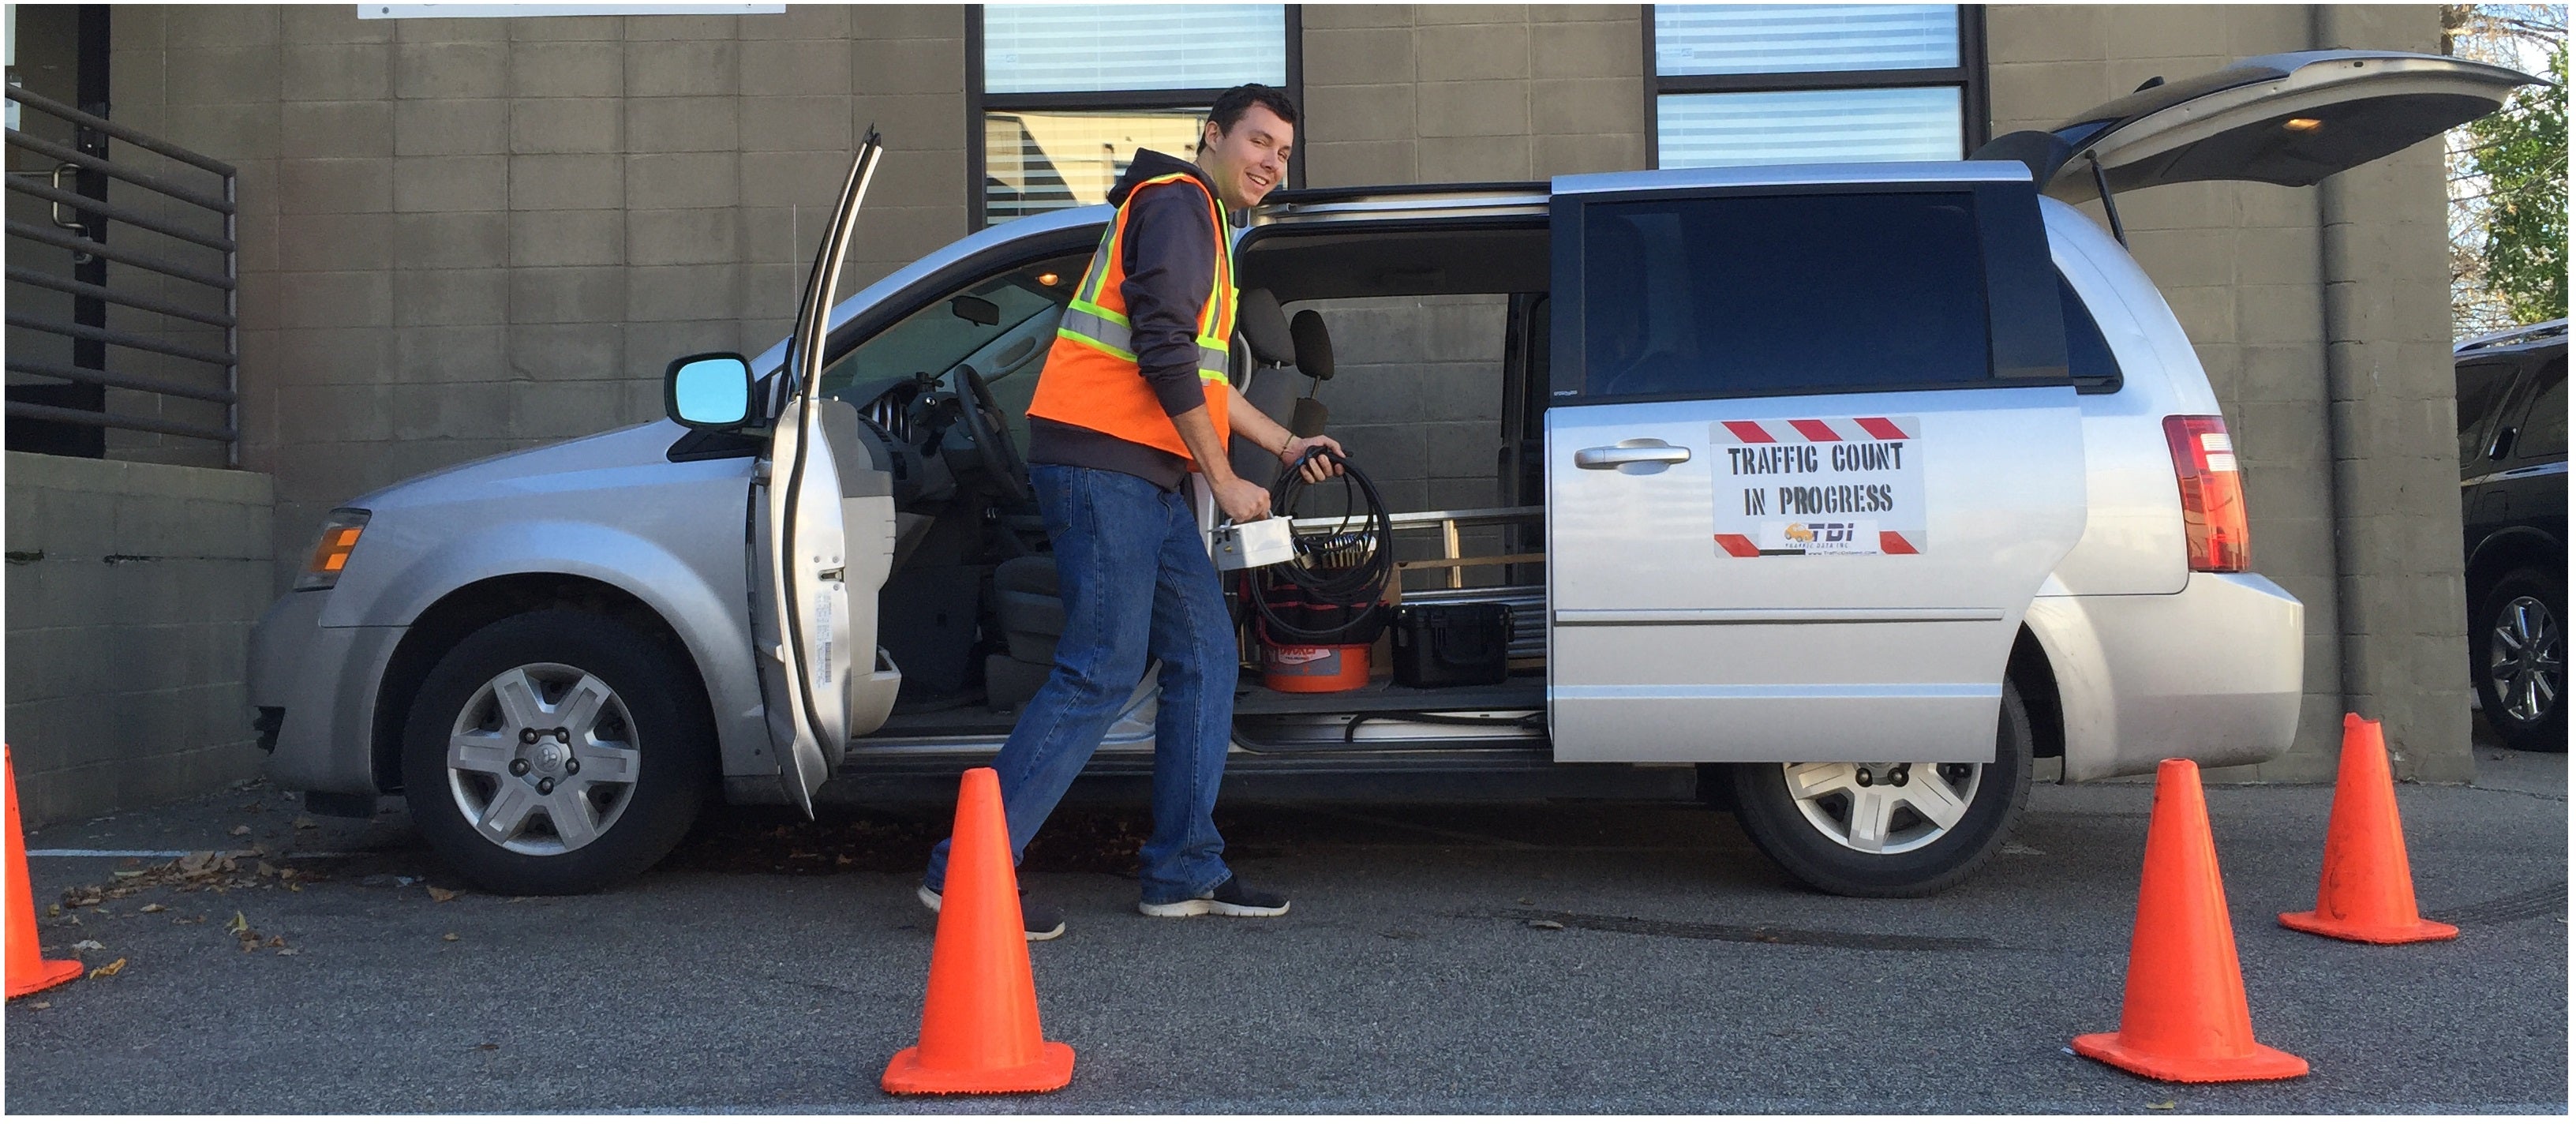 A field worker in an orange safety vest loading a minivan for data collection